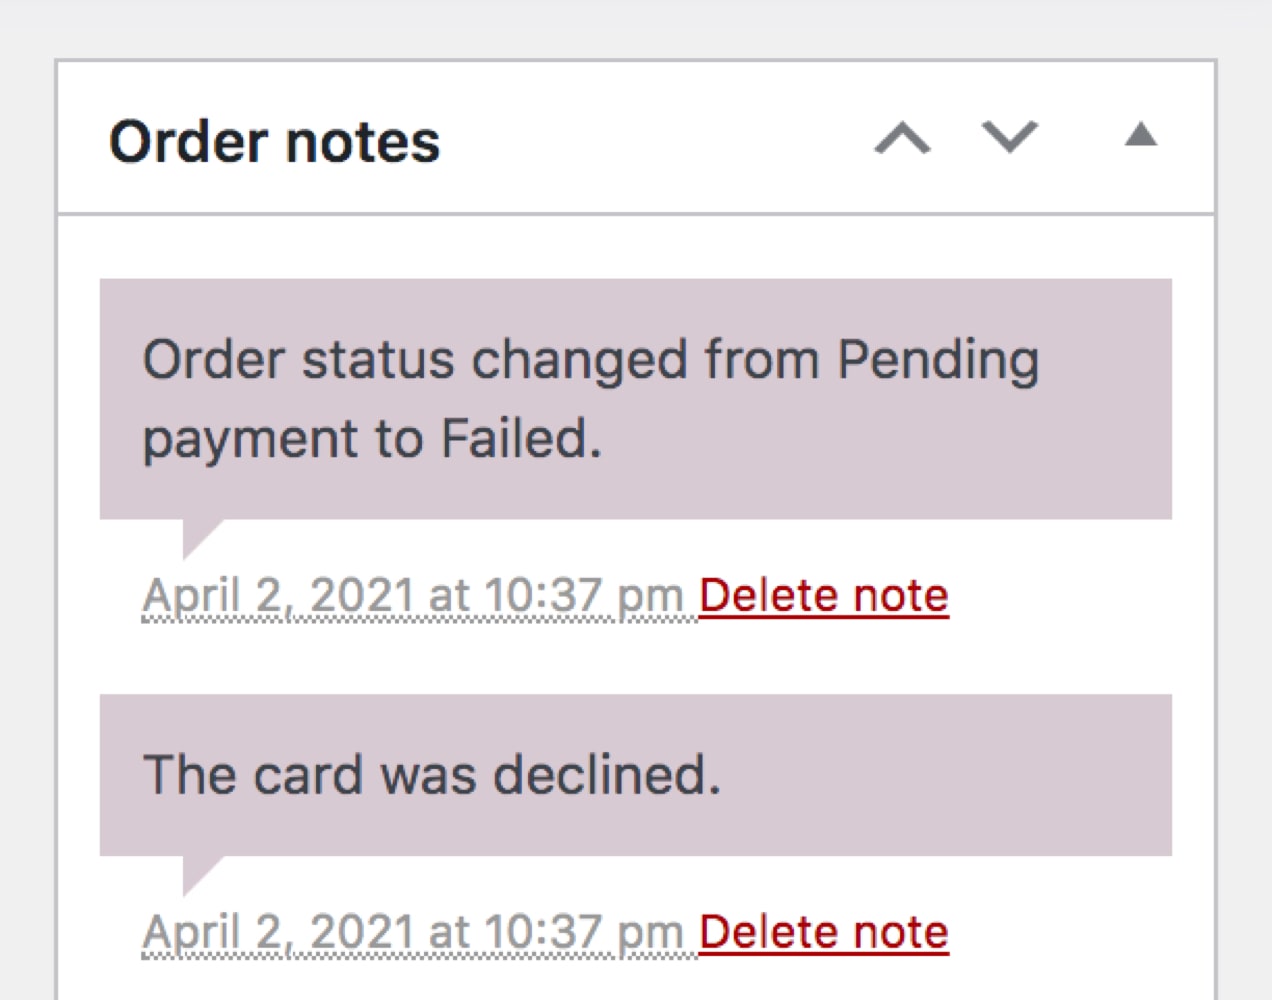 order note showing a declined card and failed order